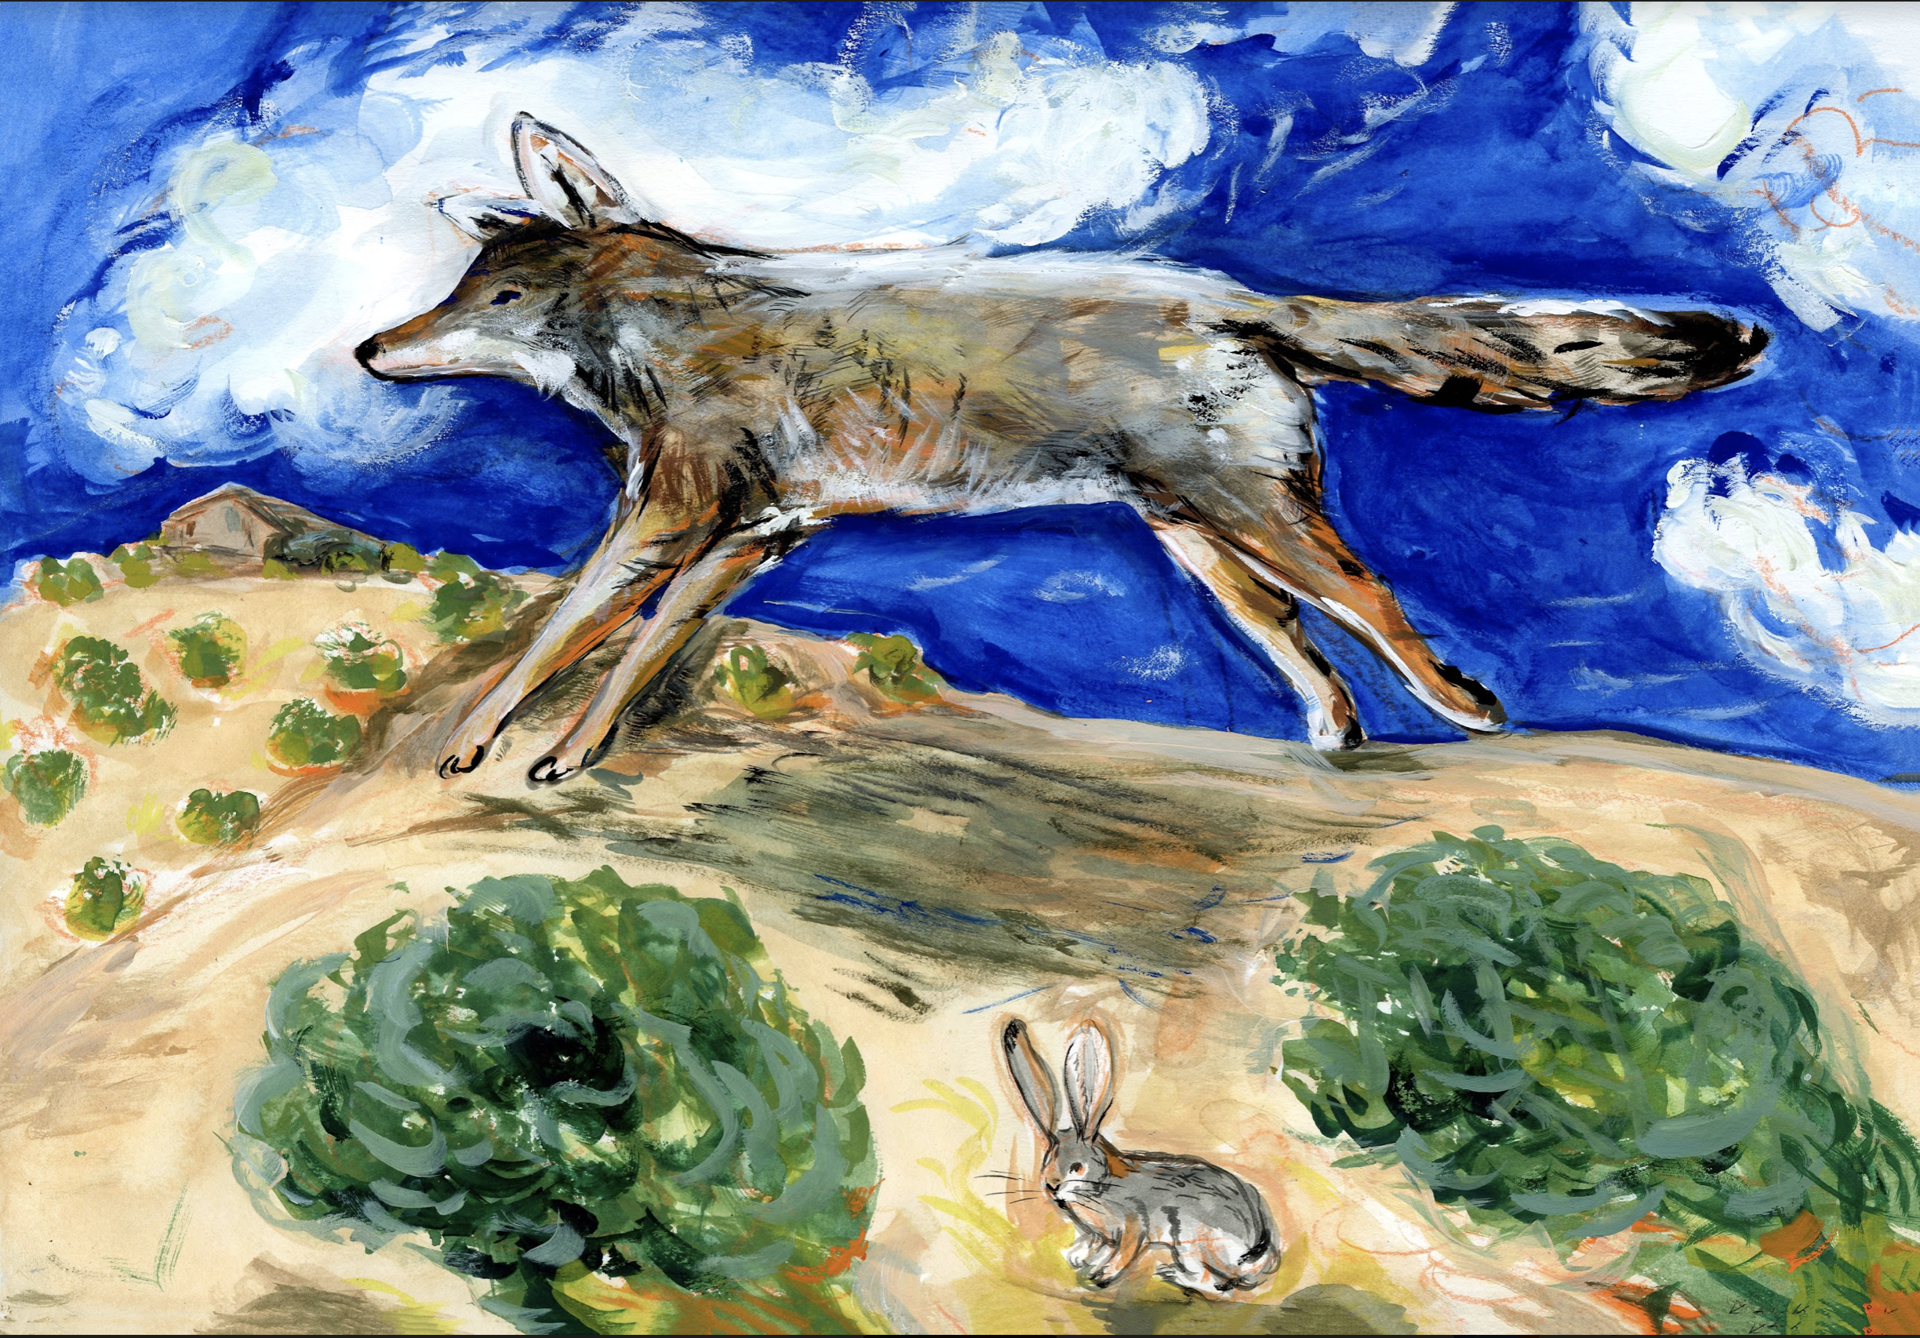 Coyote Dreams by Kat Kinnick